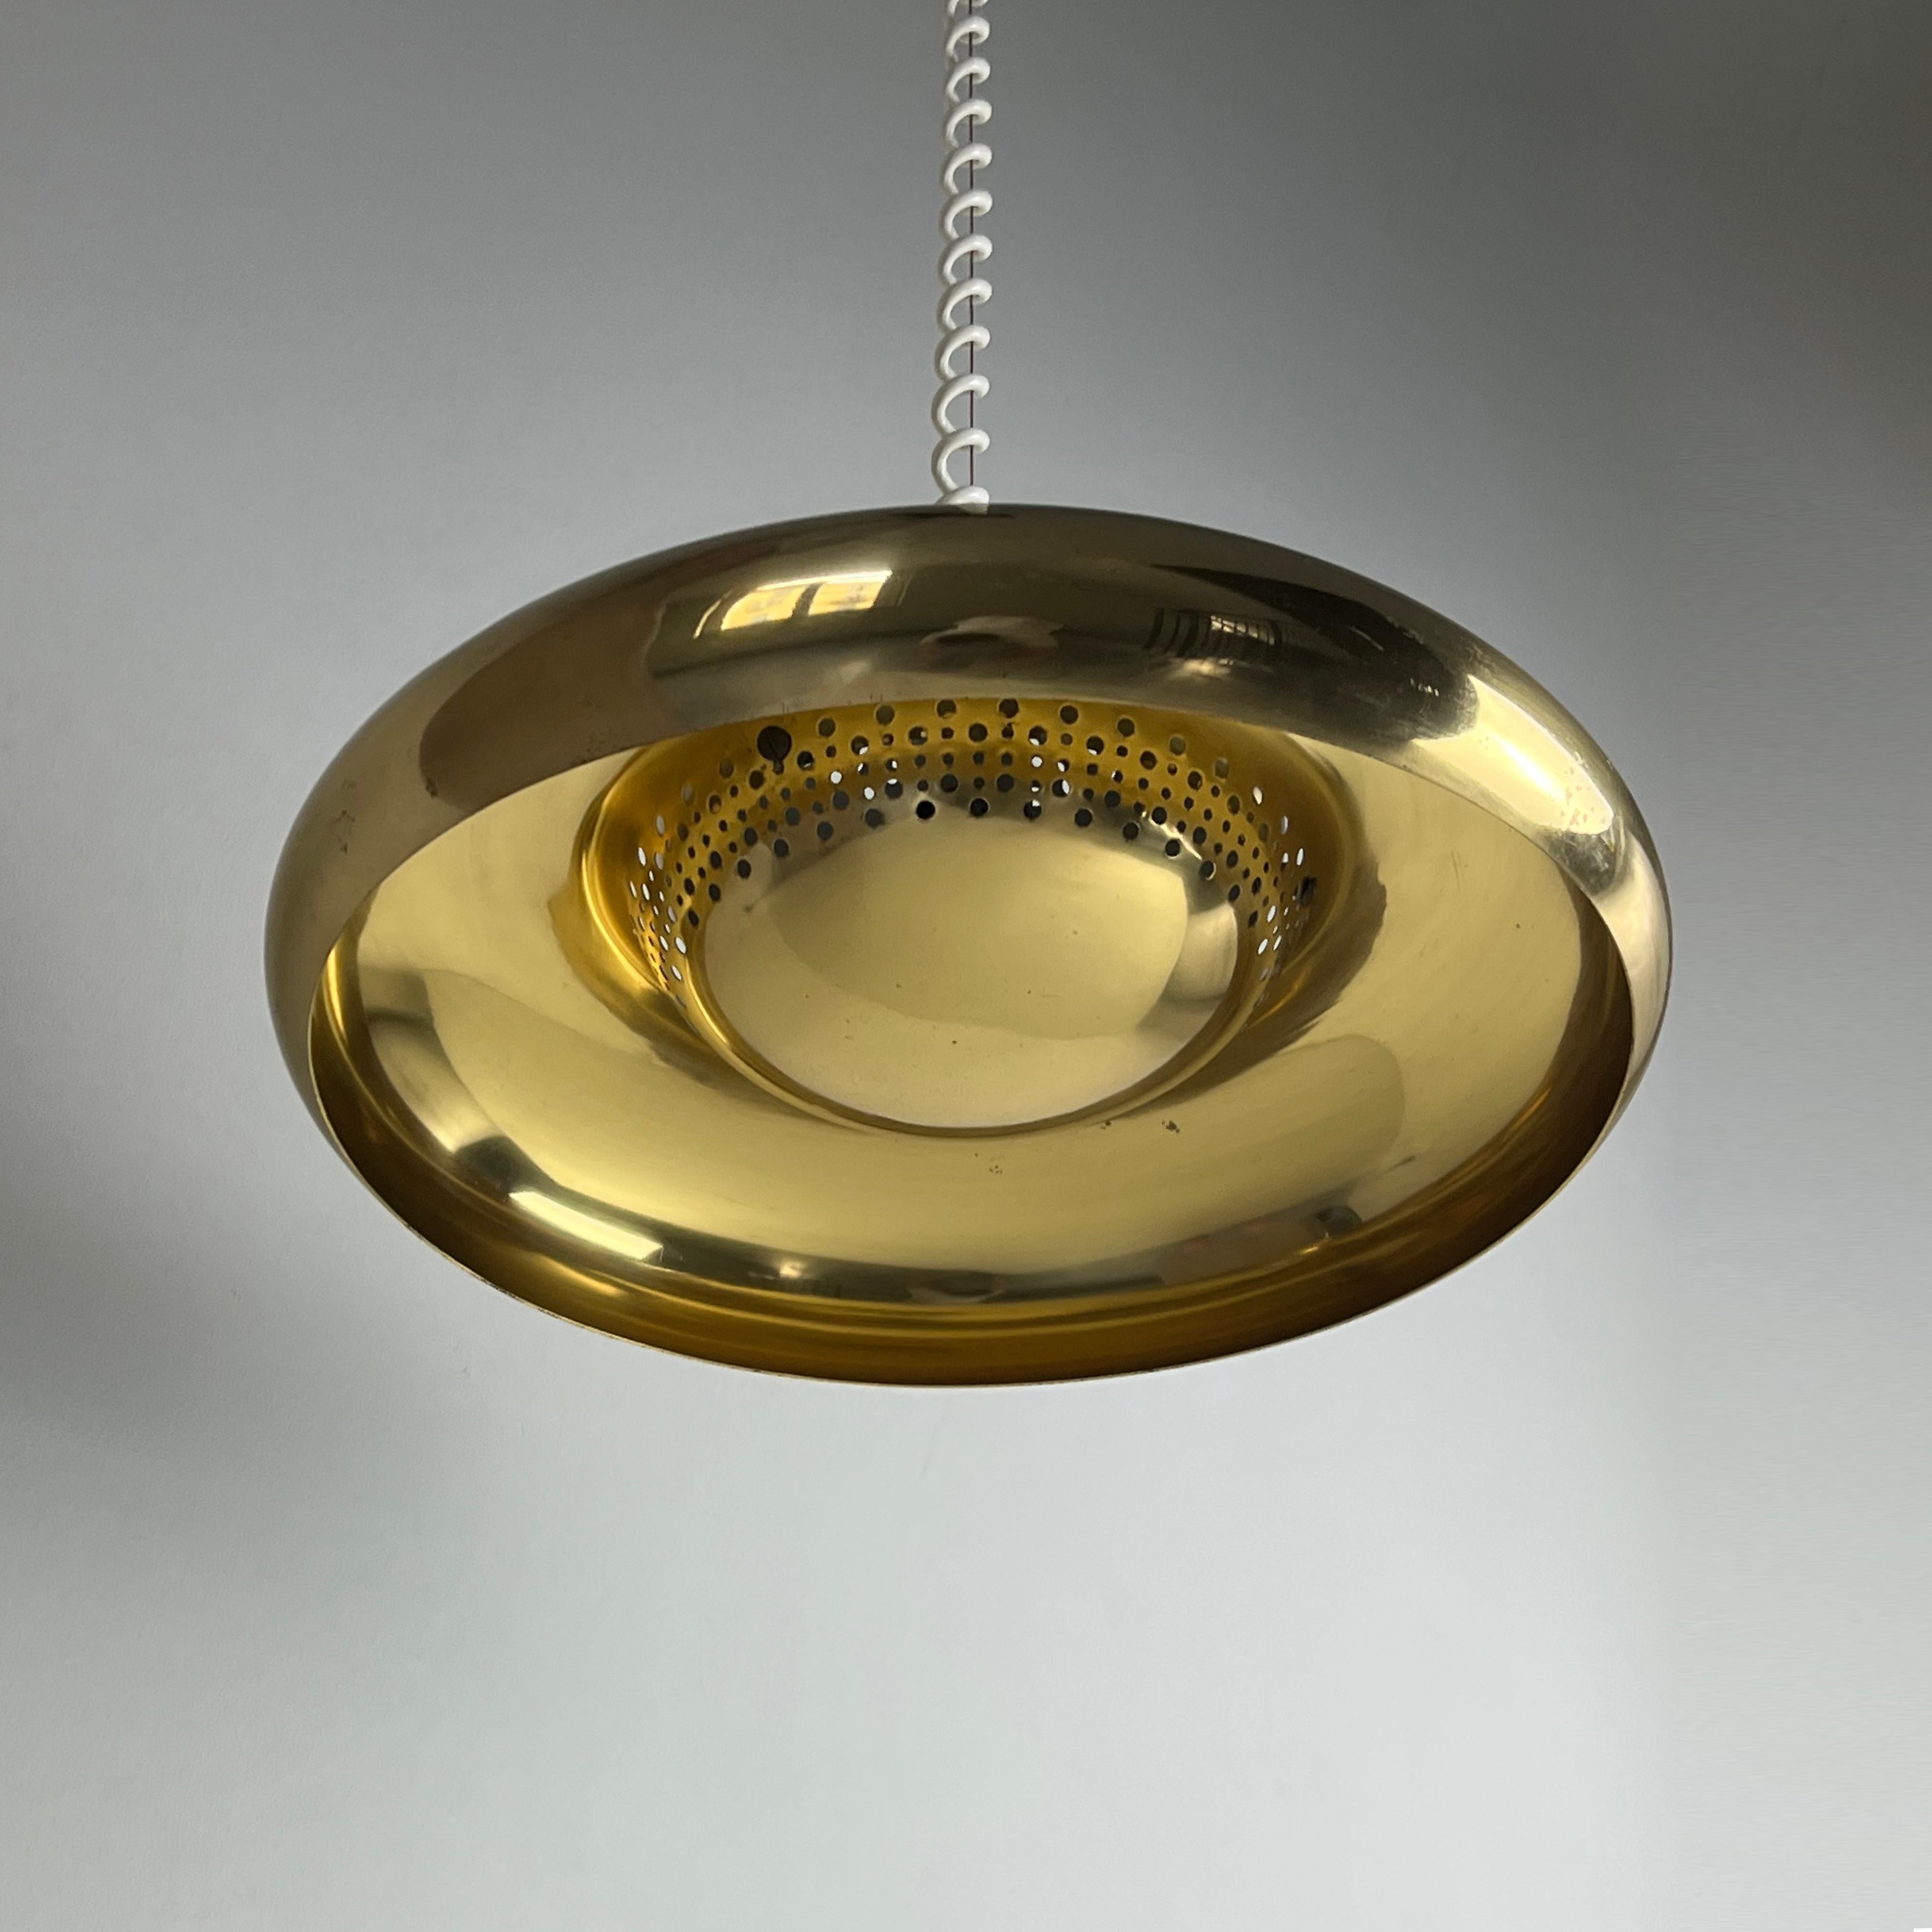 Mid-20th Century Brass Pendant Fior Di Loto by Afra and Tobia Scarpa for Flos, 1960s For Sale